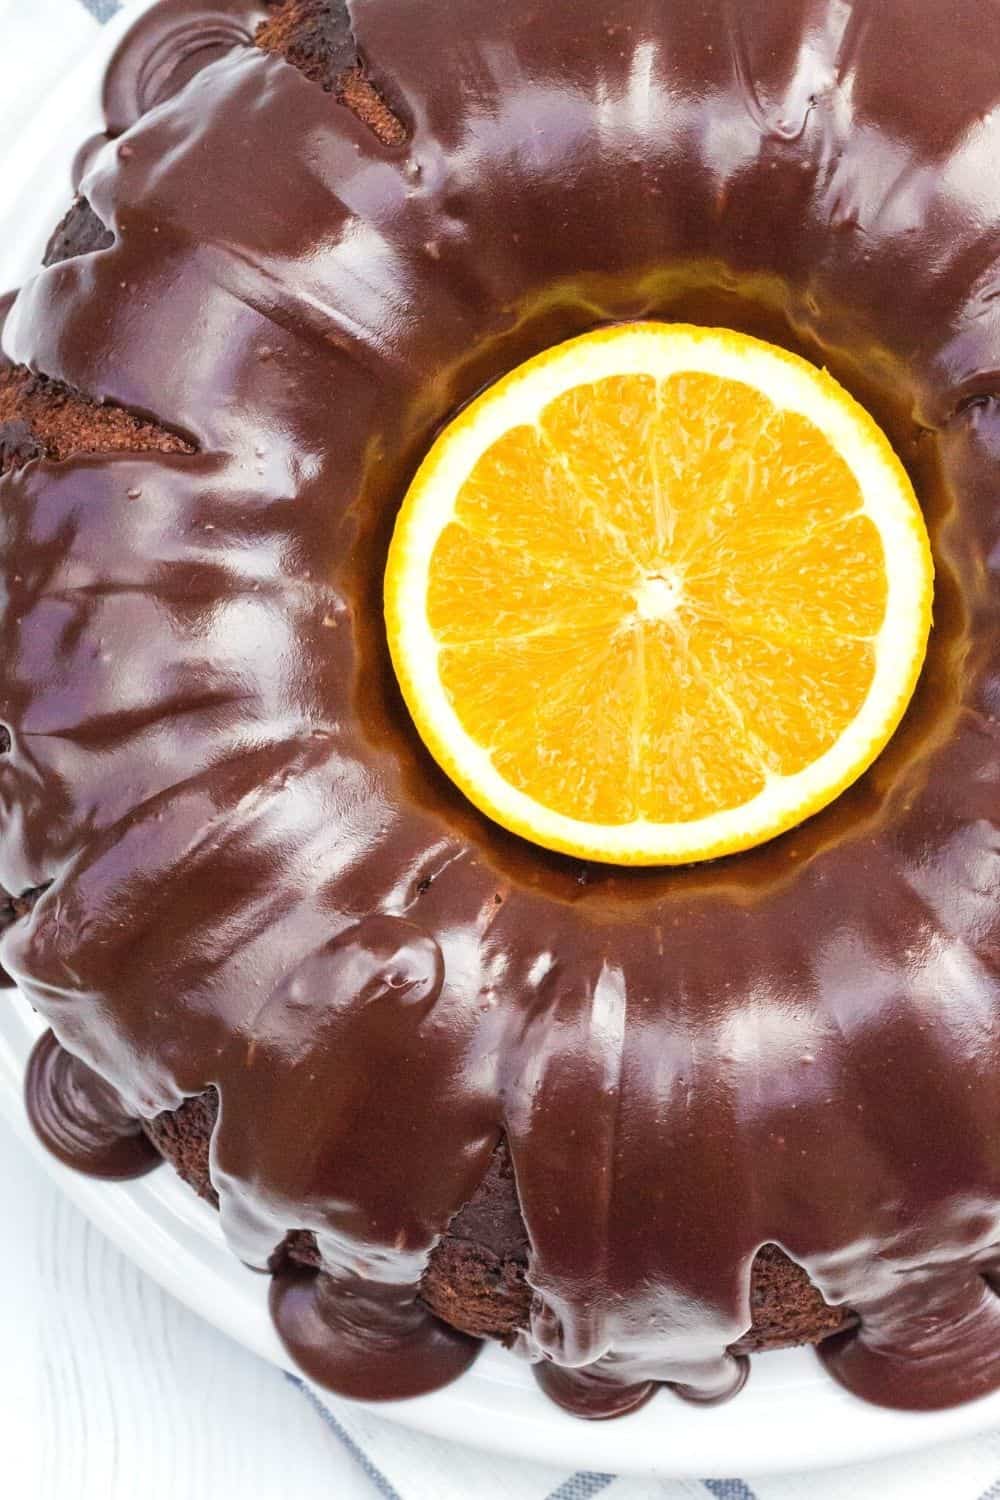 overhead view of a chocolate orange bundt cake, with a halved orange garnish in the center